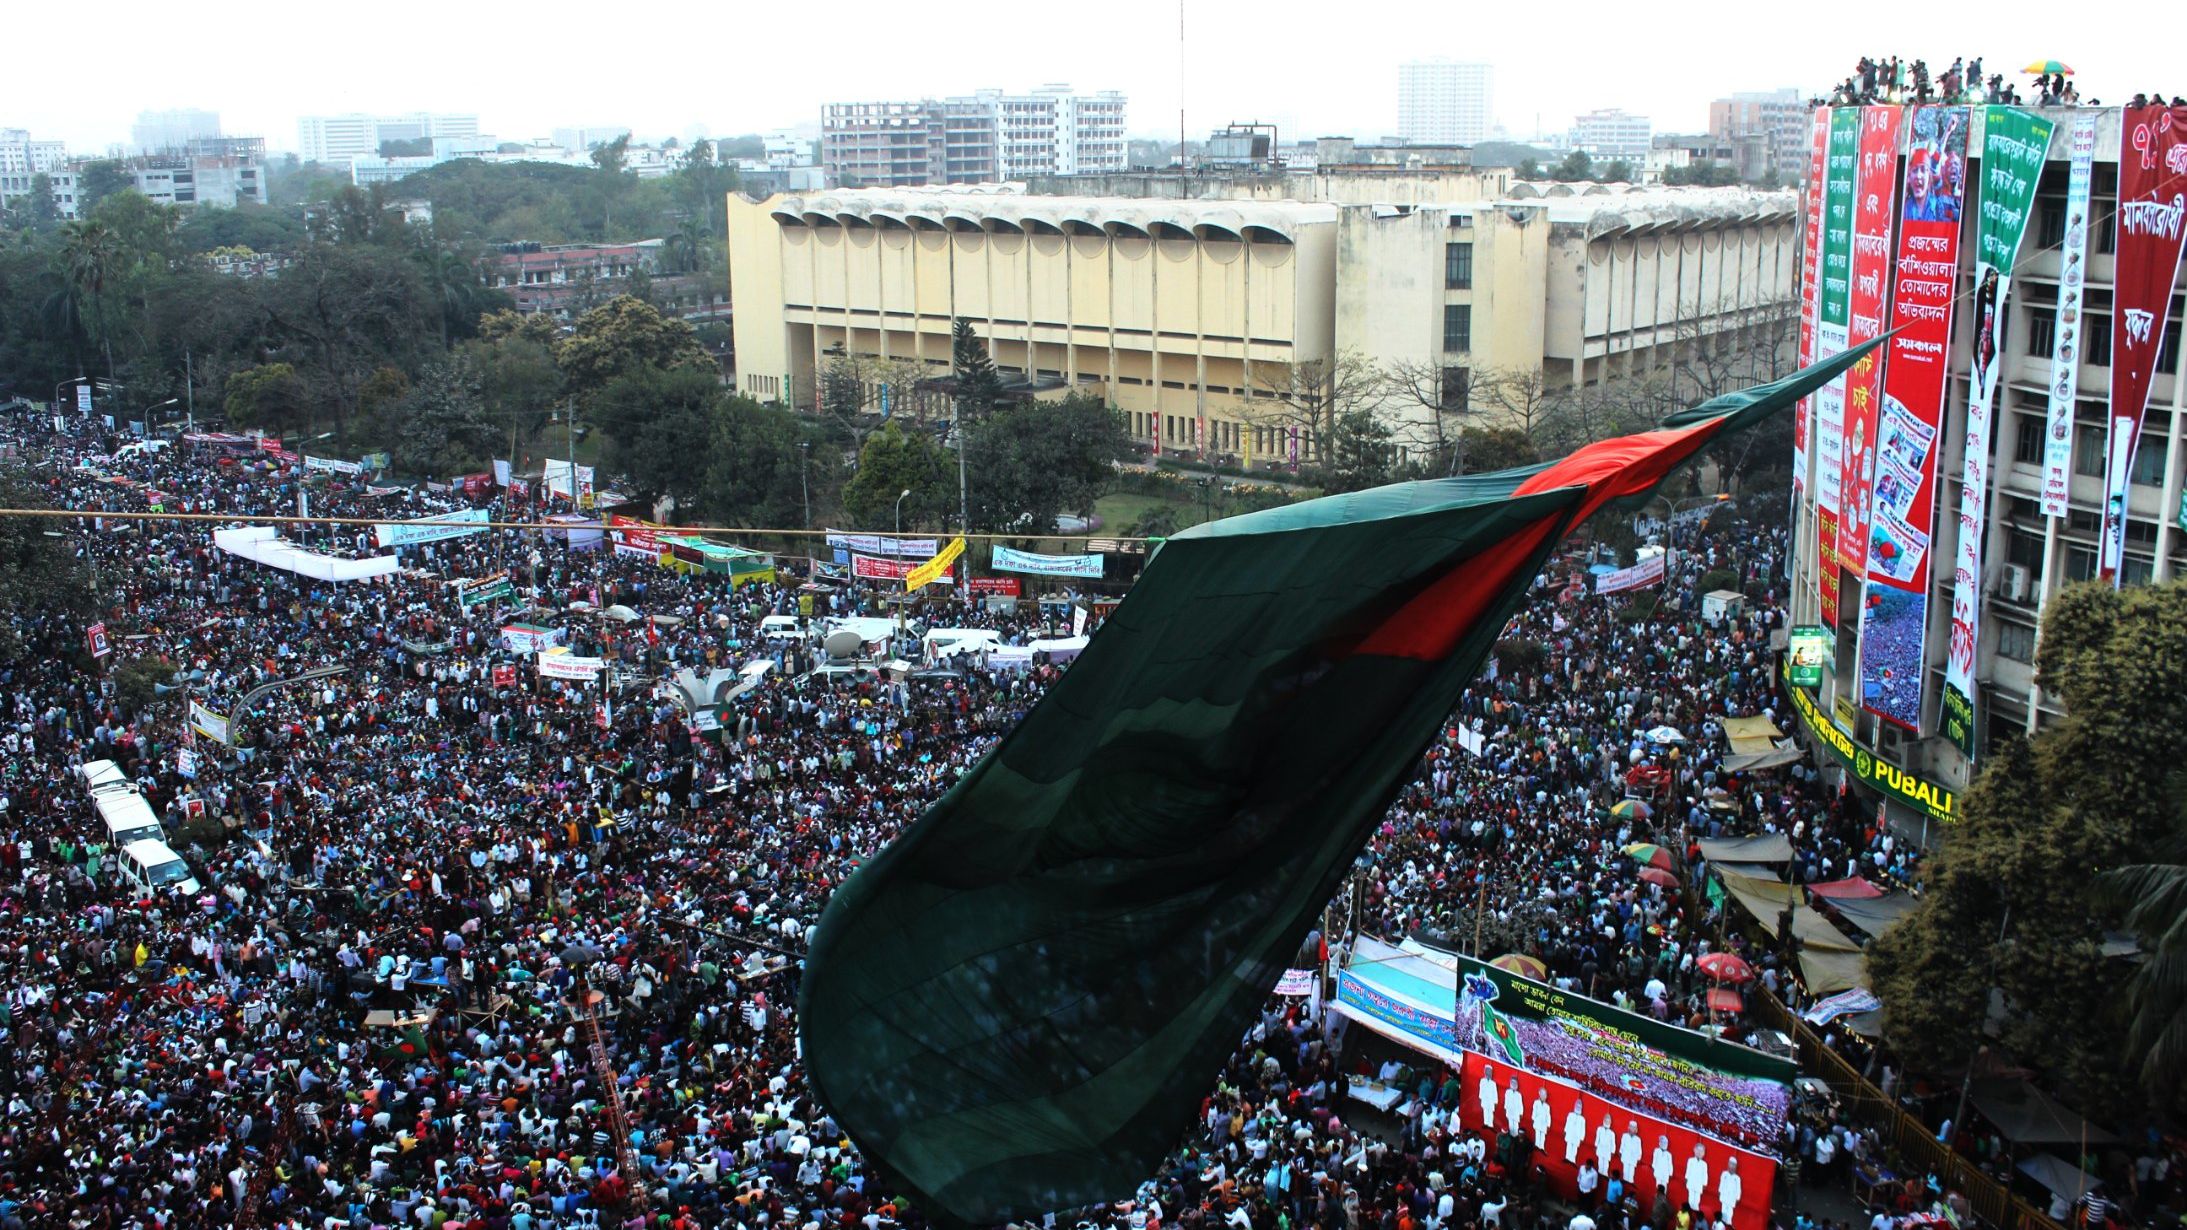 Tens of thousands join a sit-in at Shahbagh Square in Dhaka, Bangladesh, Friday, demanding the death penalty war crimes.